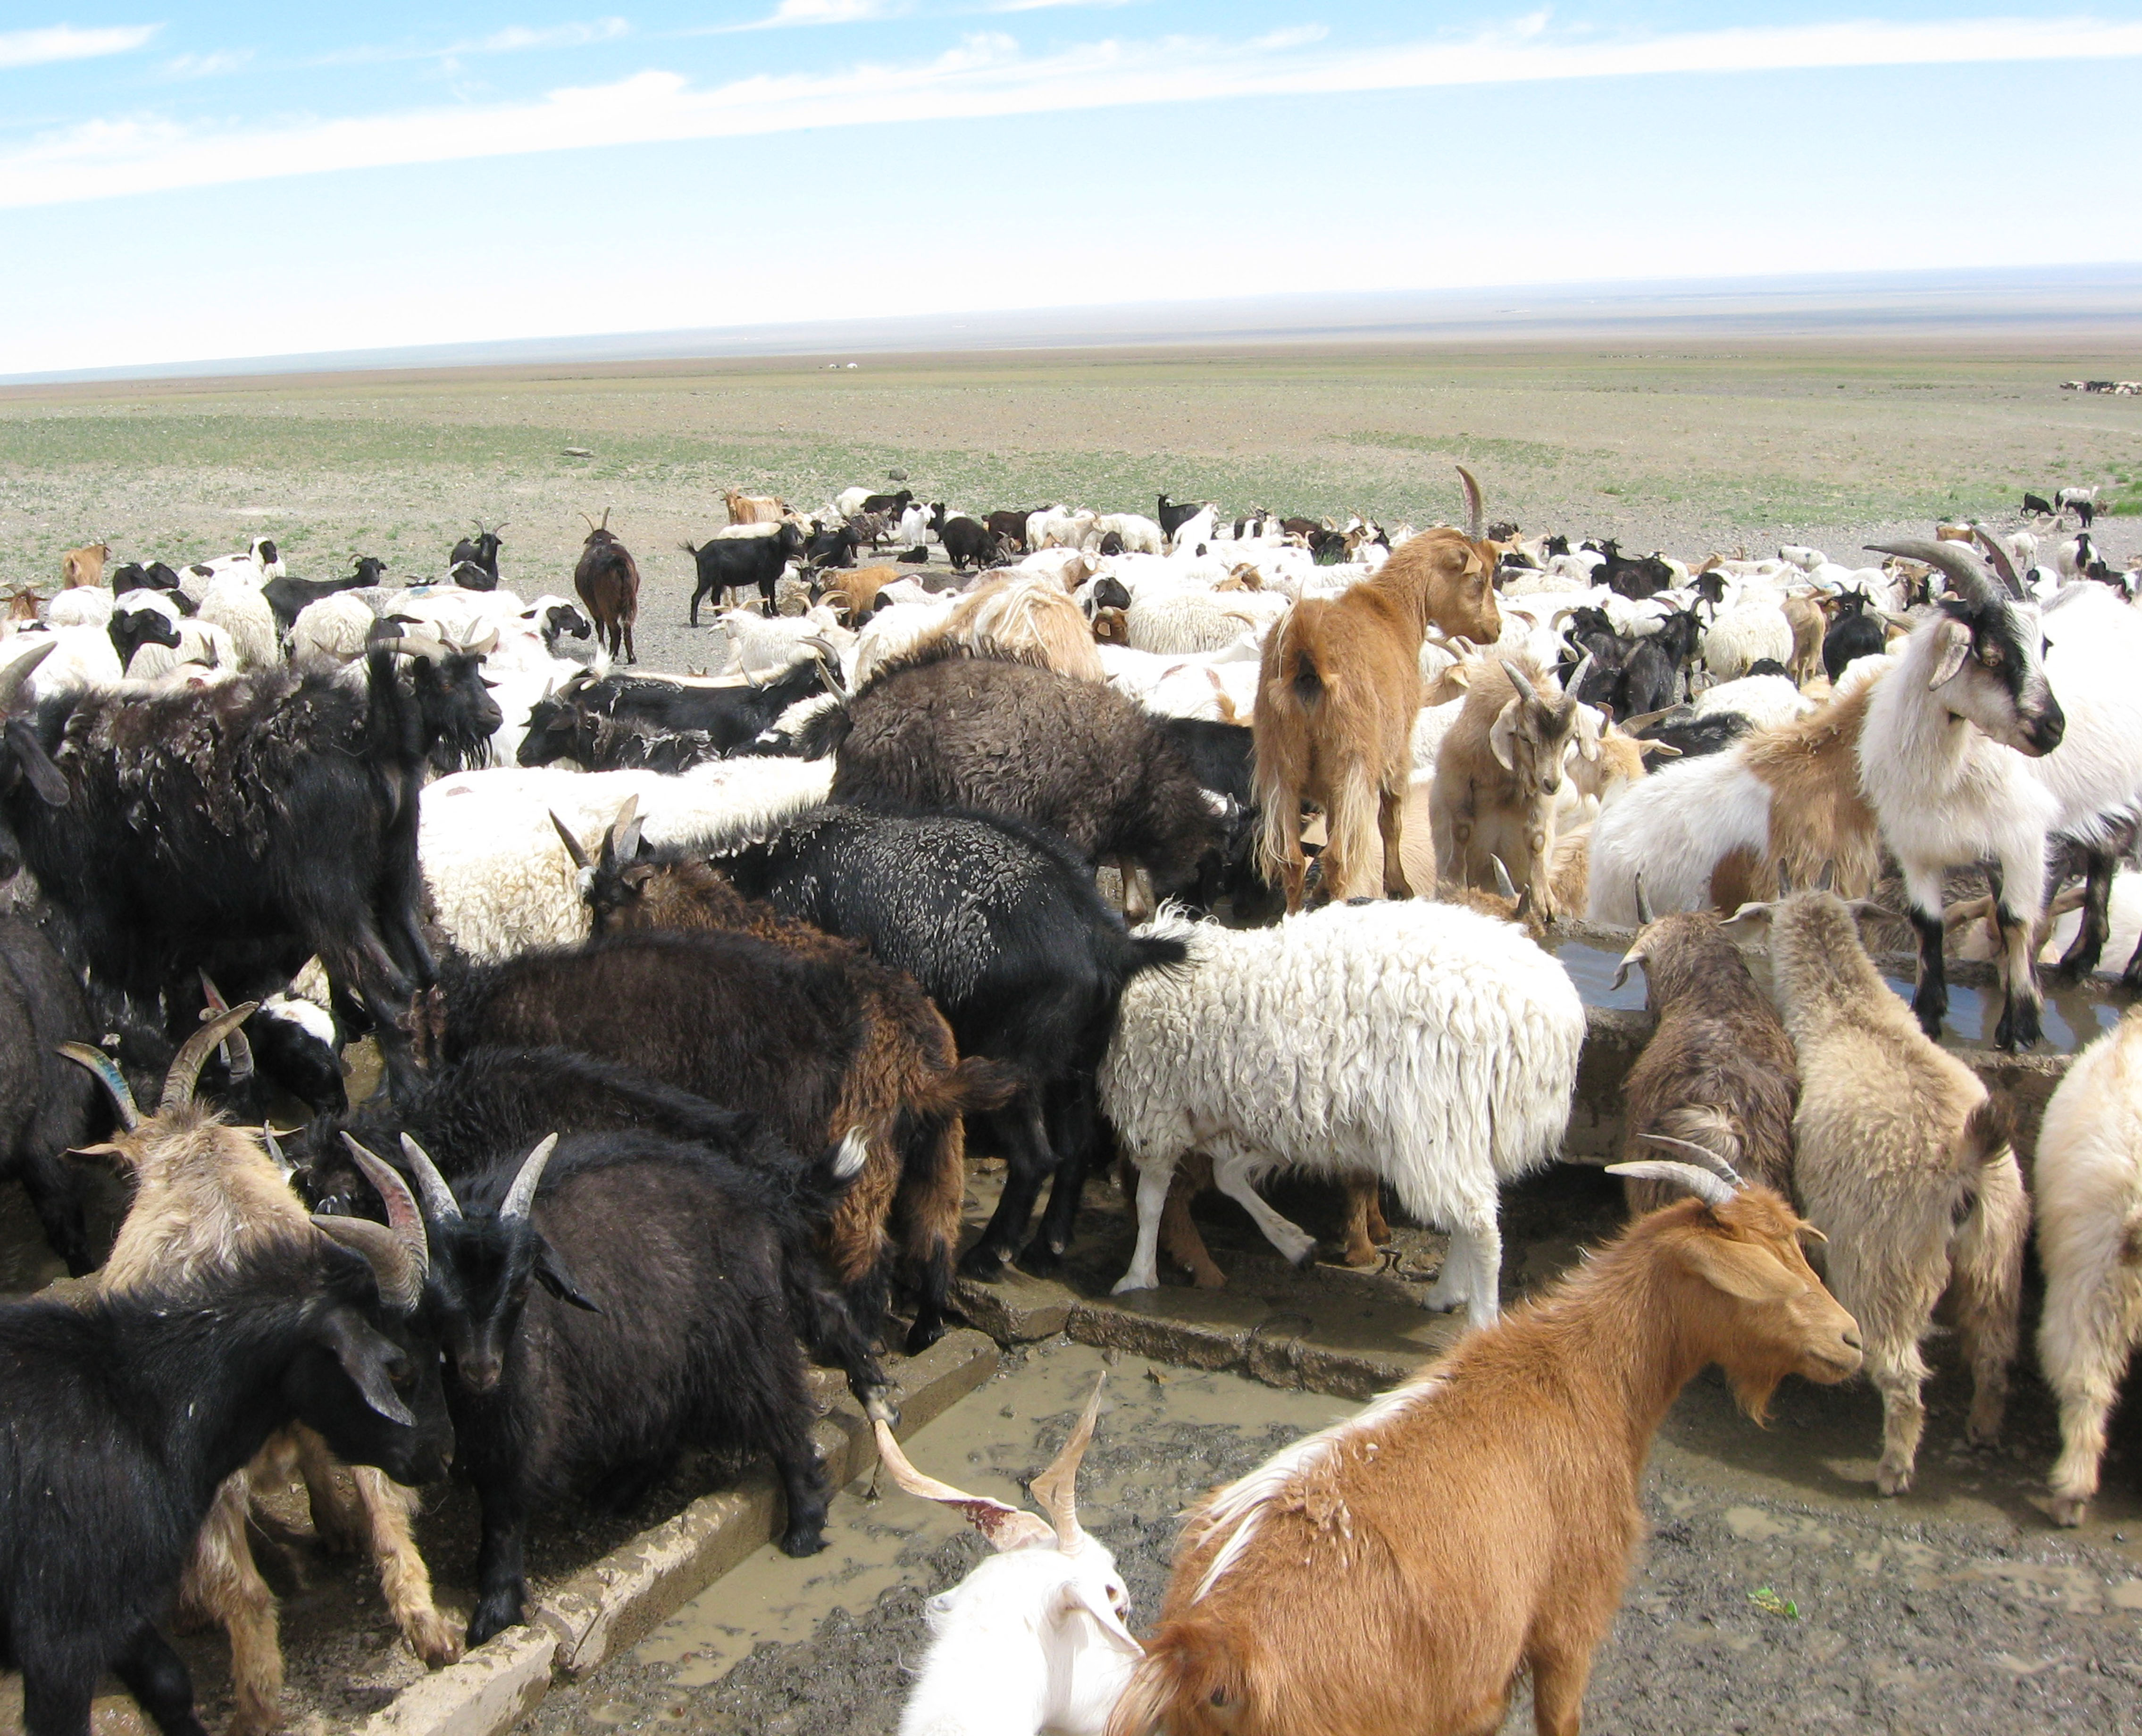 Overgrazing turning parts of Mongolian Steppe into desert